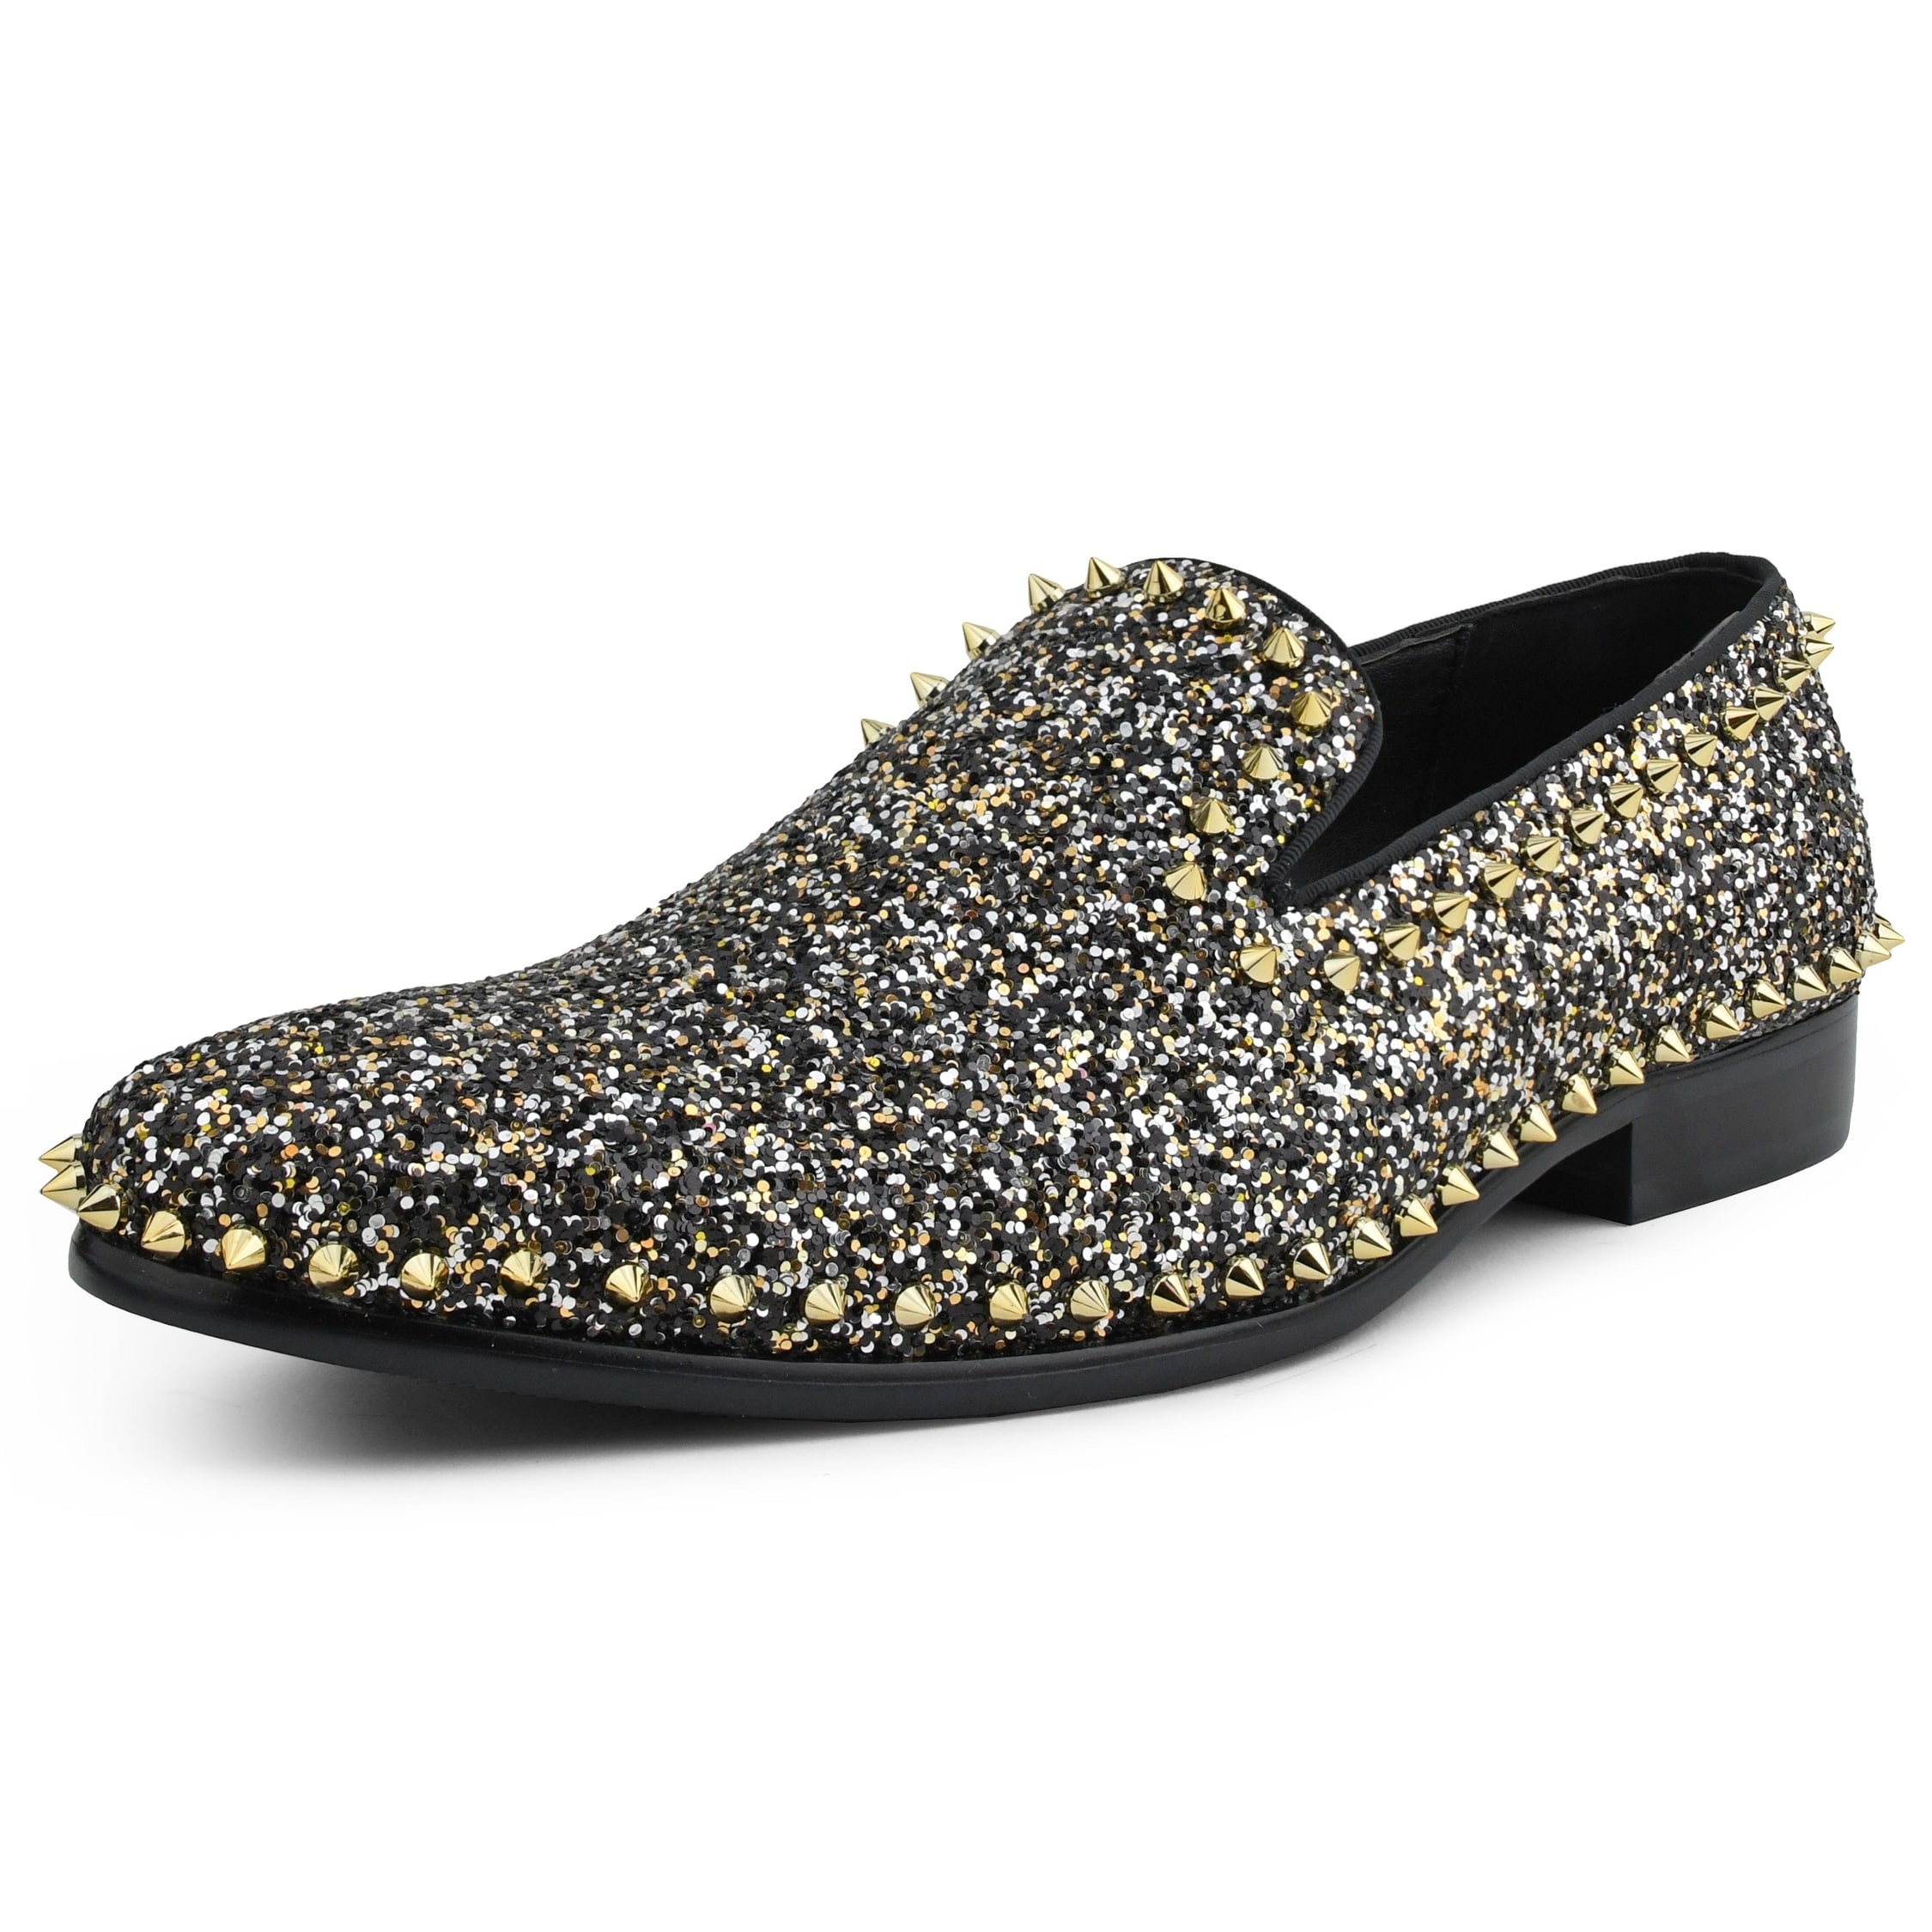 Shop Bolano Keats Glitter and Spiked 